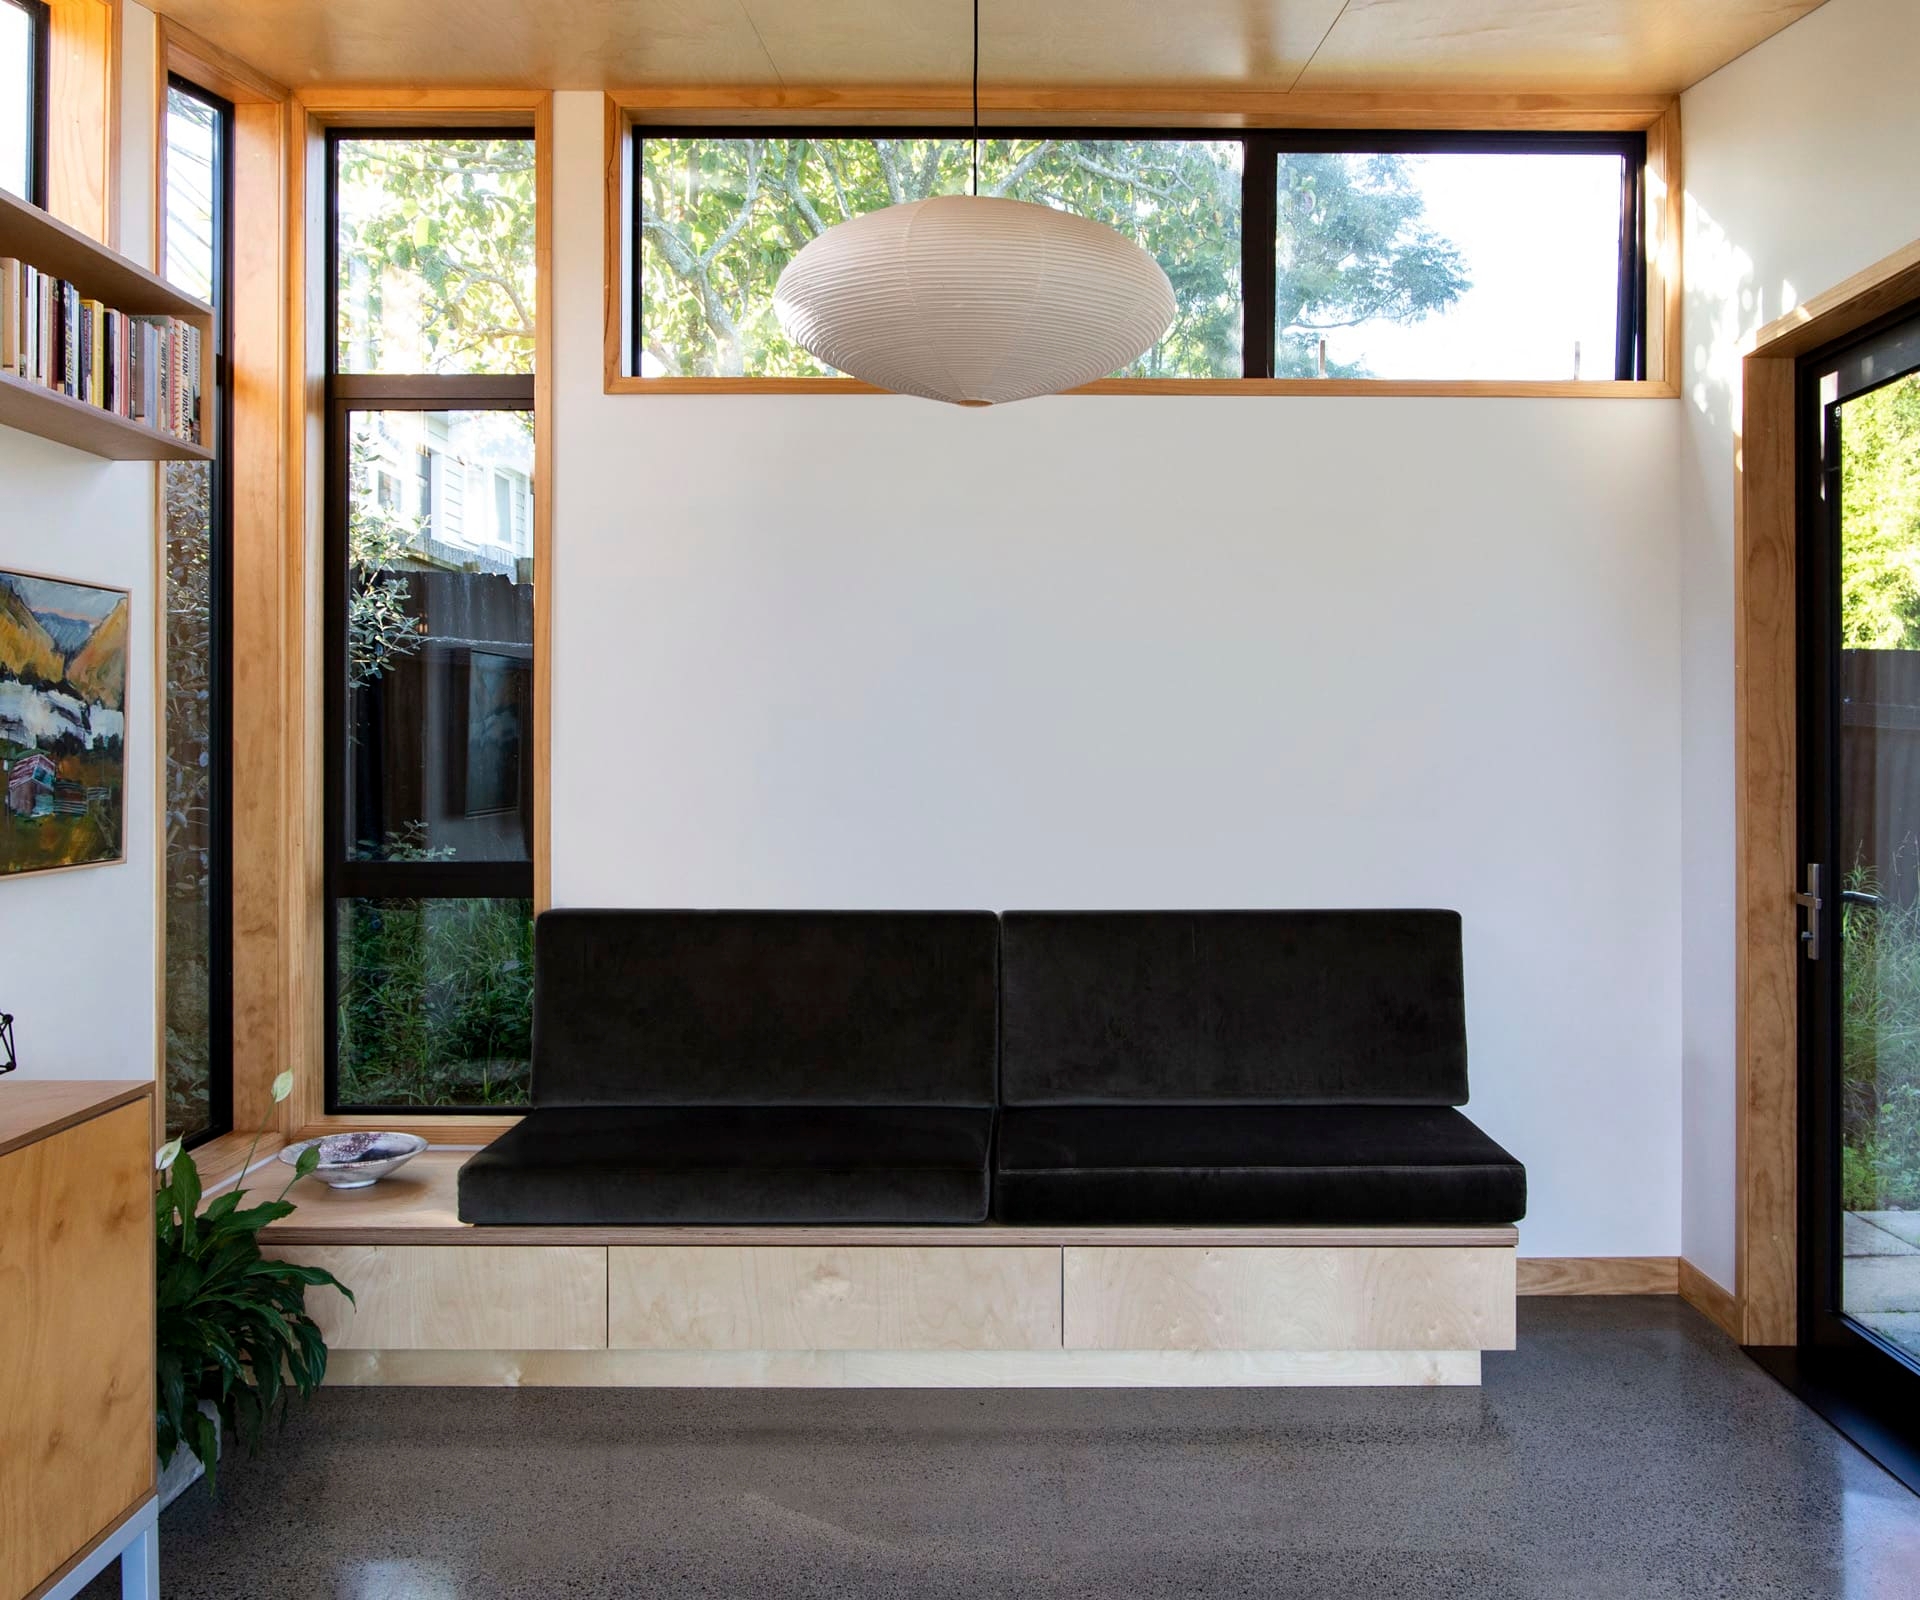 Entryway of the home with concrete floors and a floating seat